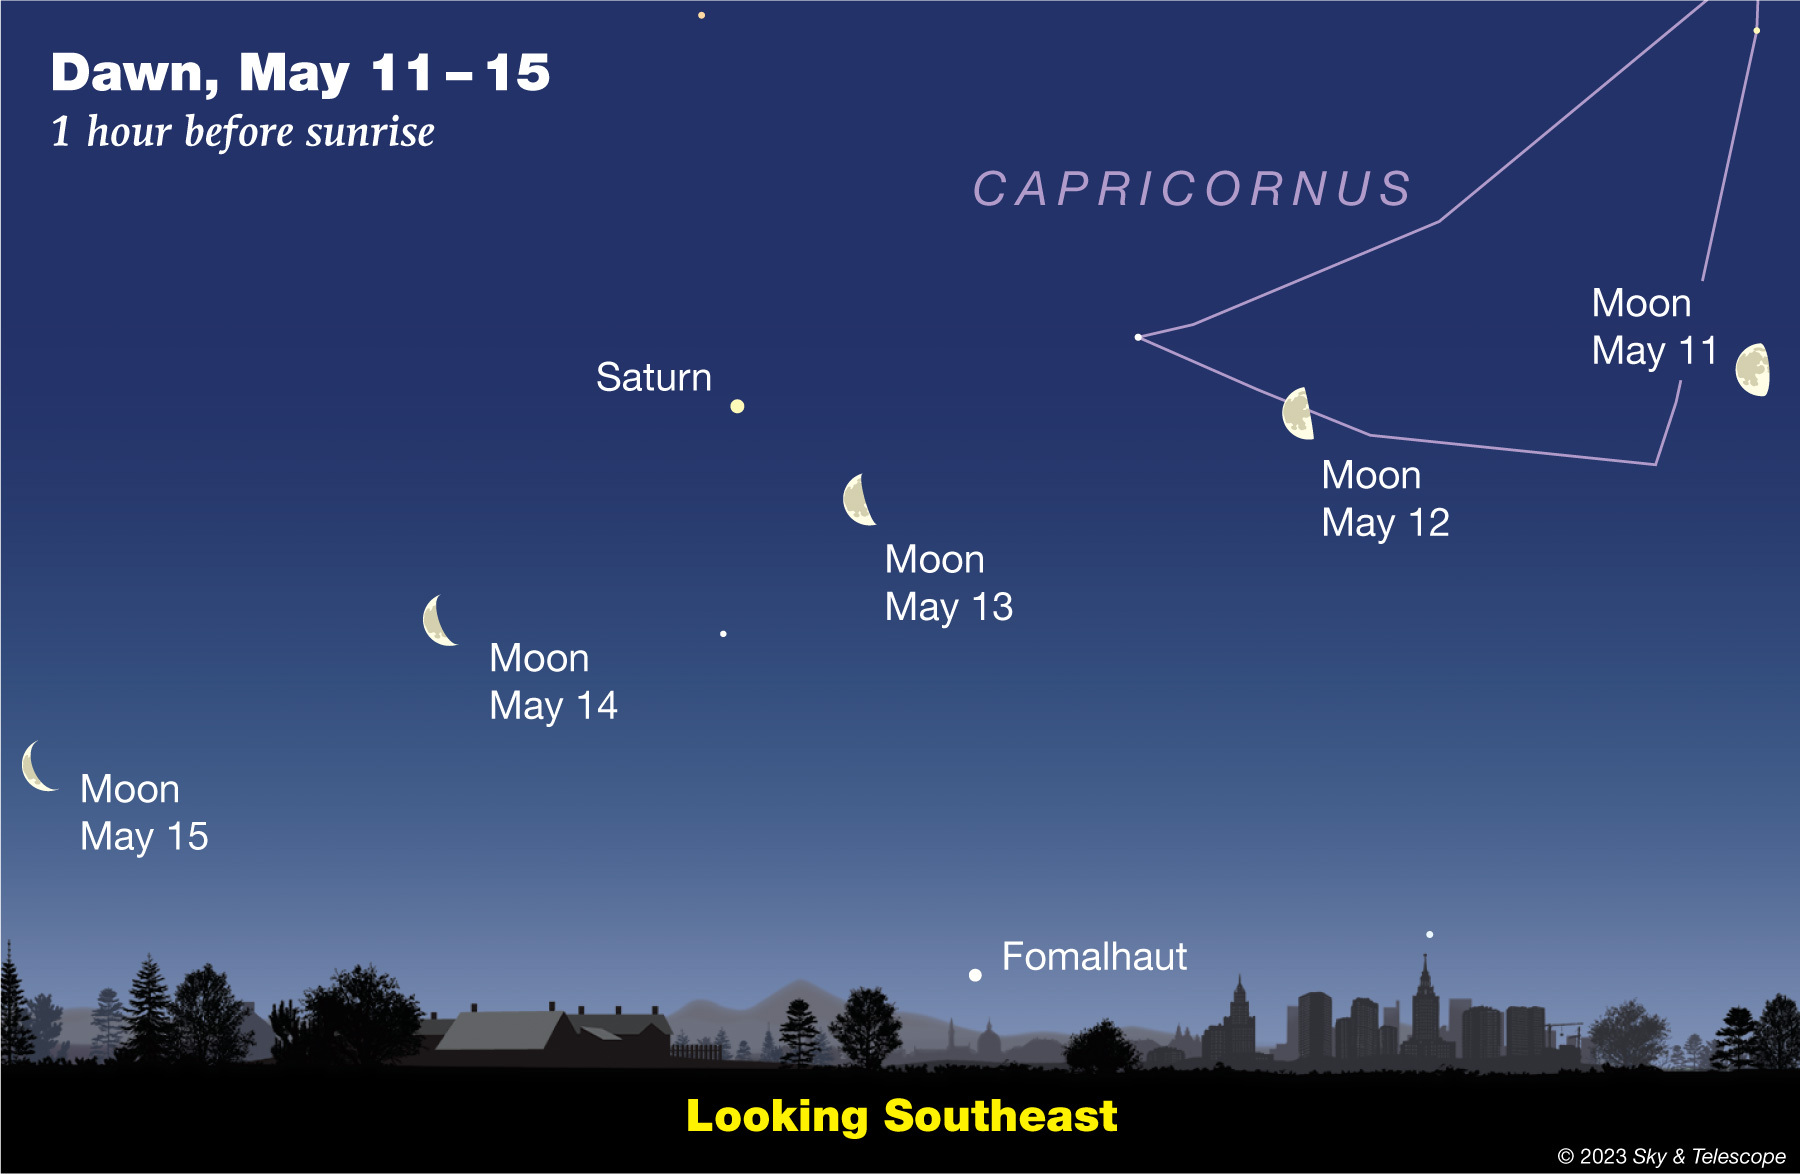 The waning Moon hangs under Saturn in the dawn of May 13, 2023